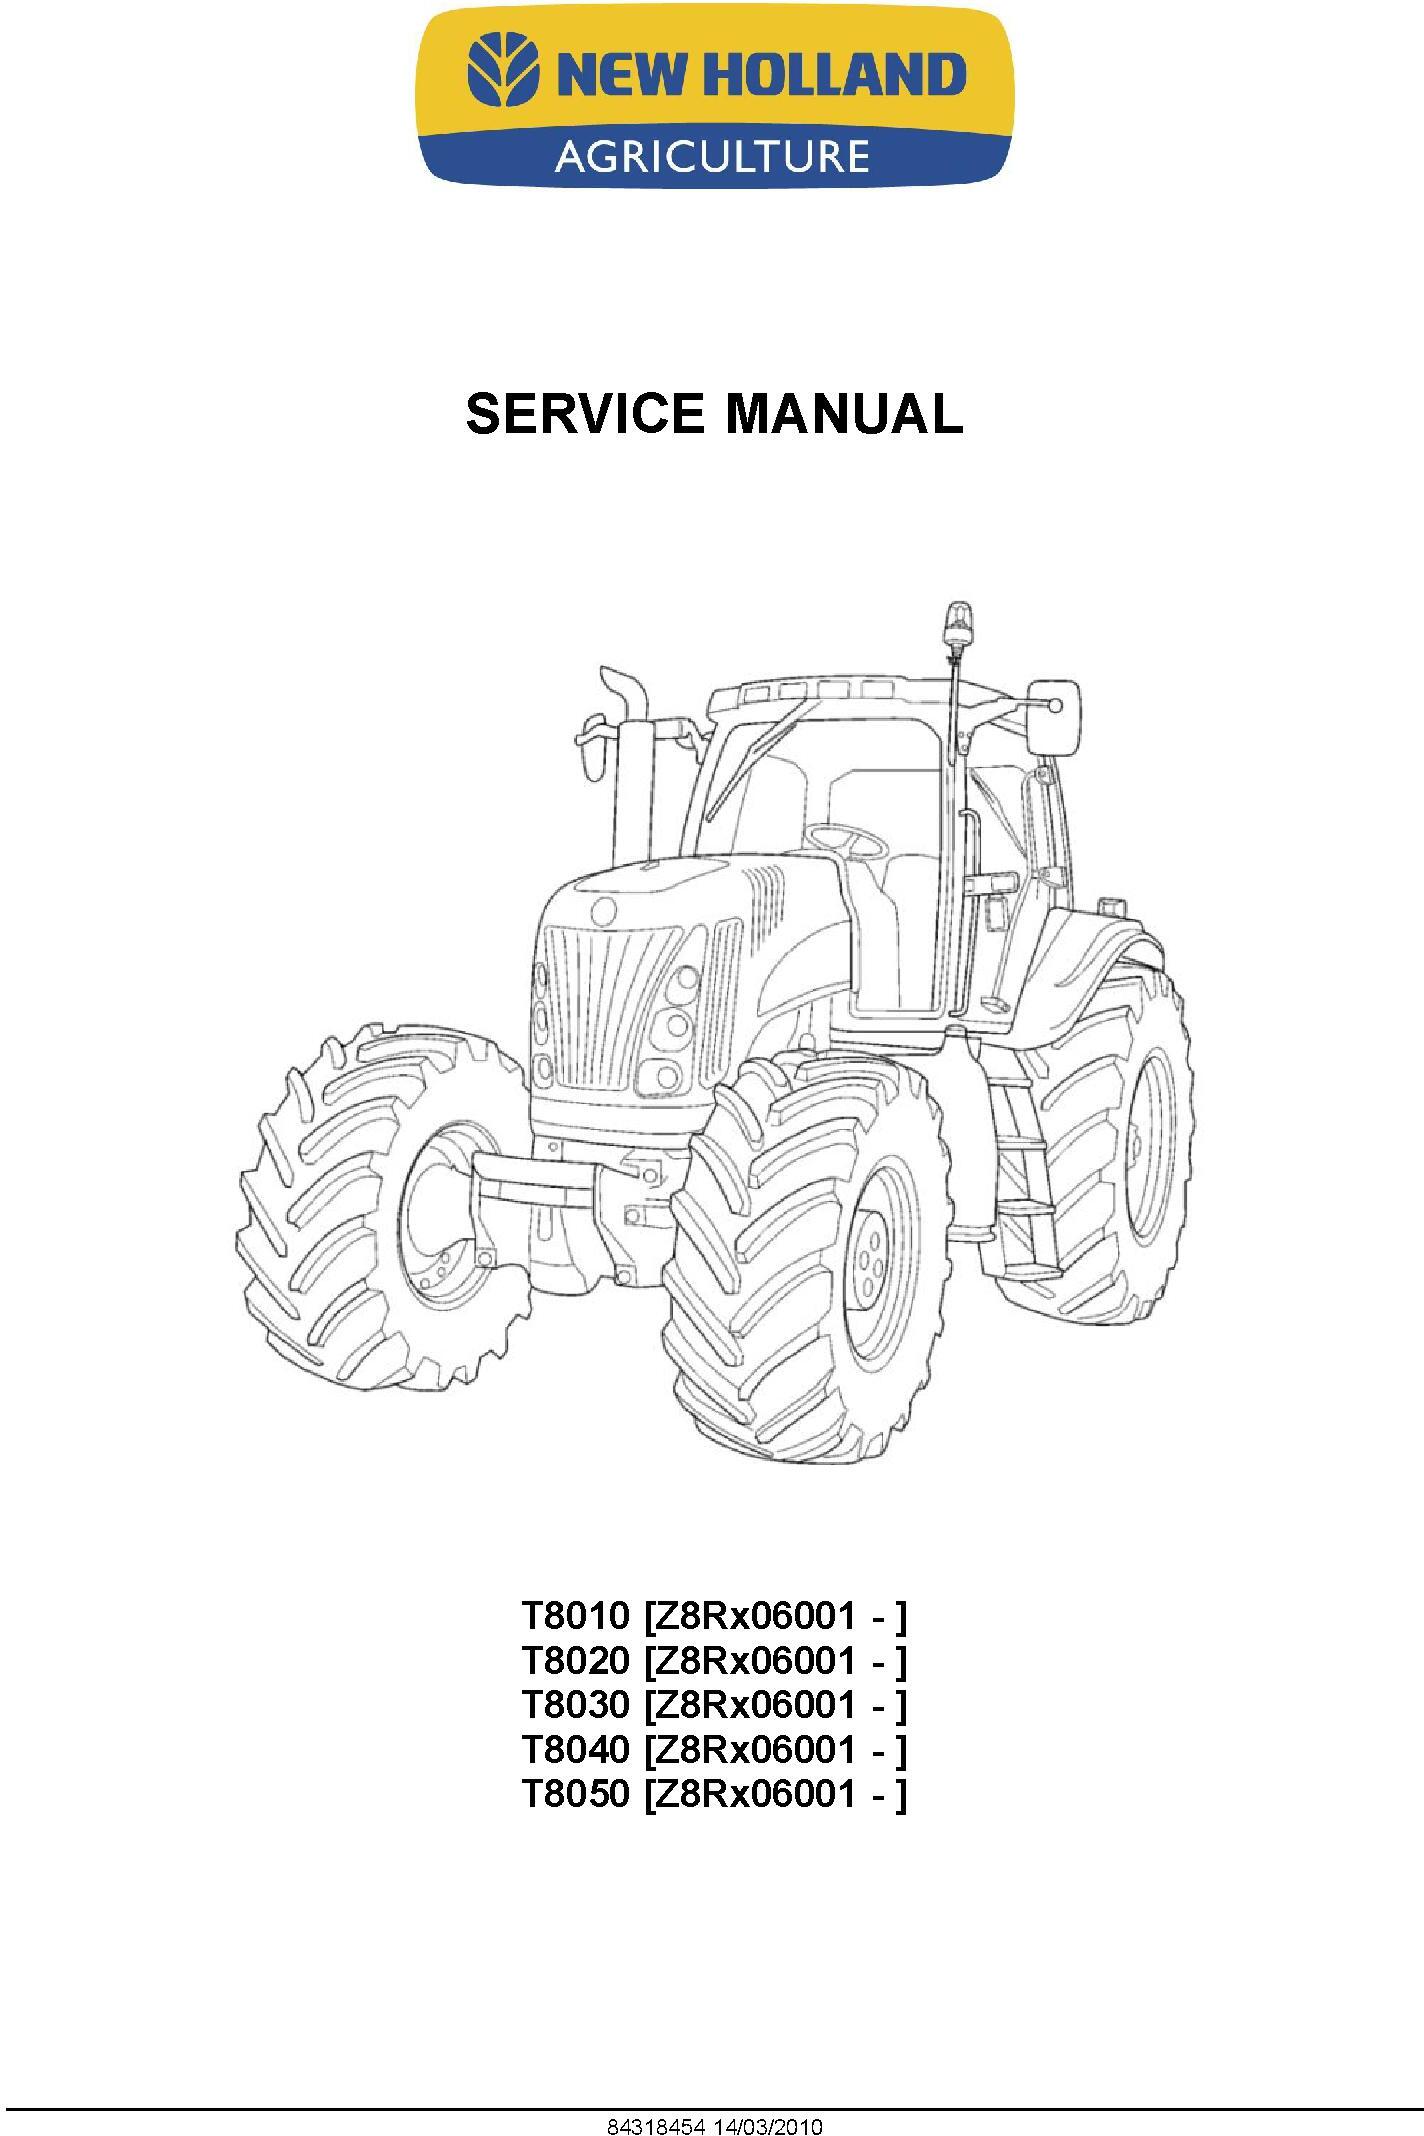 New Holland T8010, T8020, T8030, T8040, T8050 Agricultural Tractor Service Manual - 1